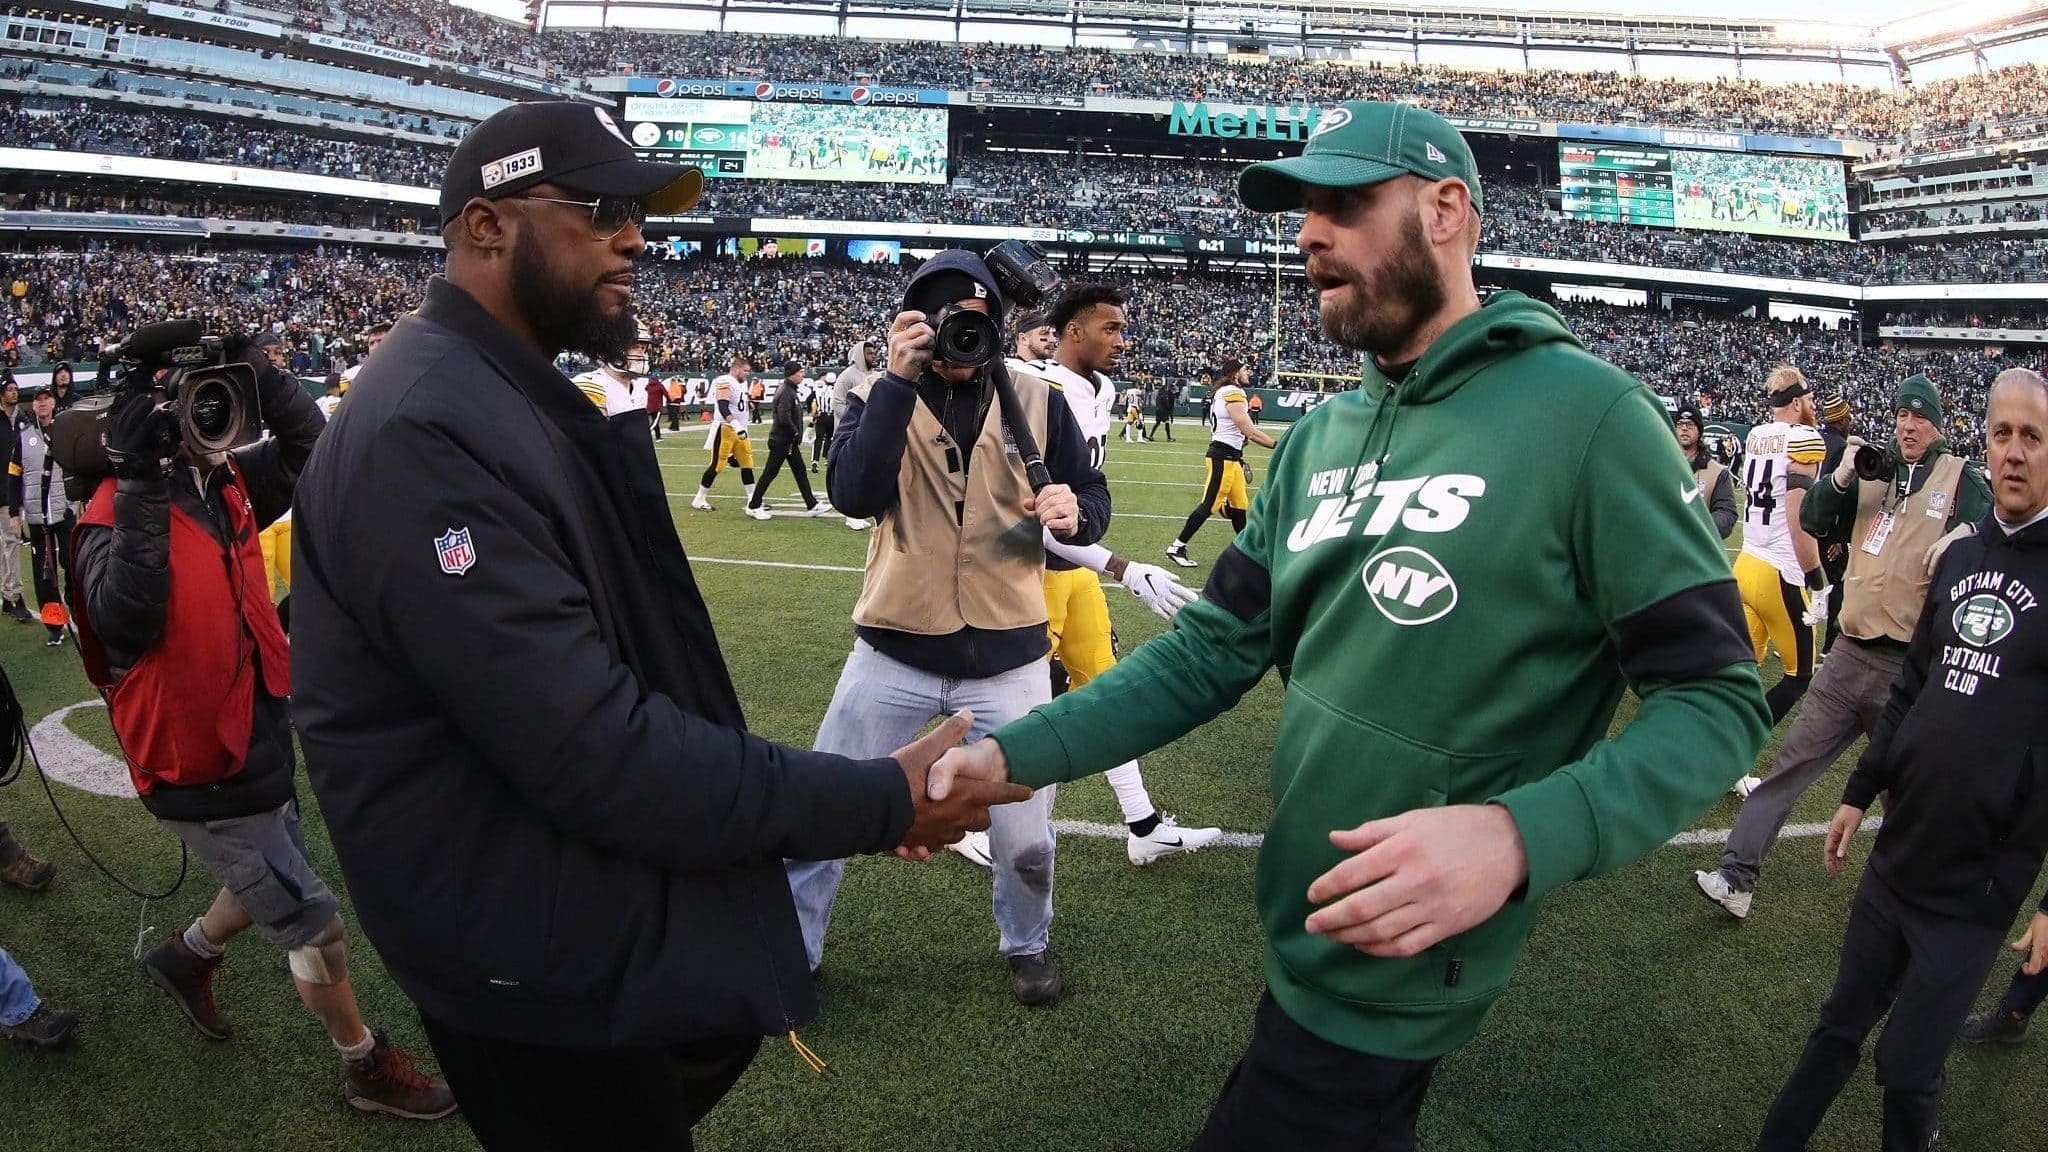 EAST RUTHERFORD, NEW JERSEY - DECEMBER 22: Head coach Mike Tomlin of the Pittsburgh Steelers meets head coach Adam Gase of the New York Jets after the Jets 16-10 win at MetLife Stadium on December 22, 2019 in East Rutherford, New Jersey.